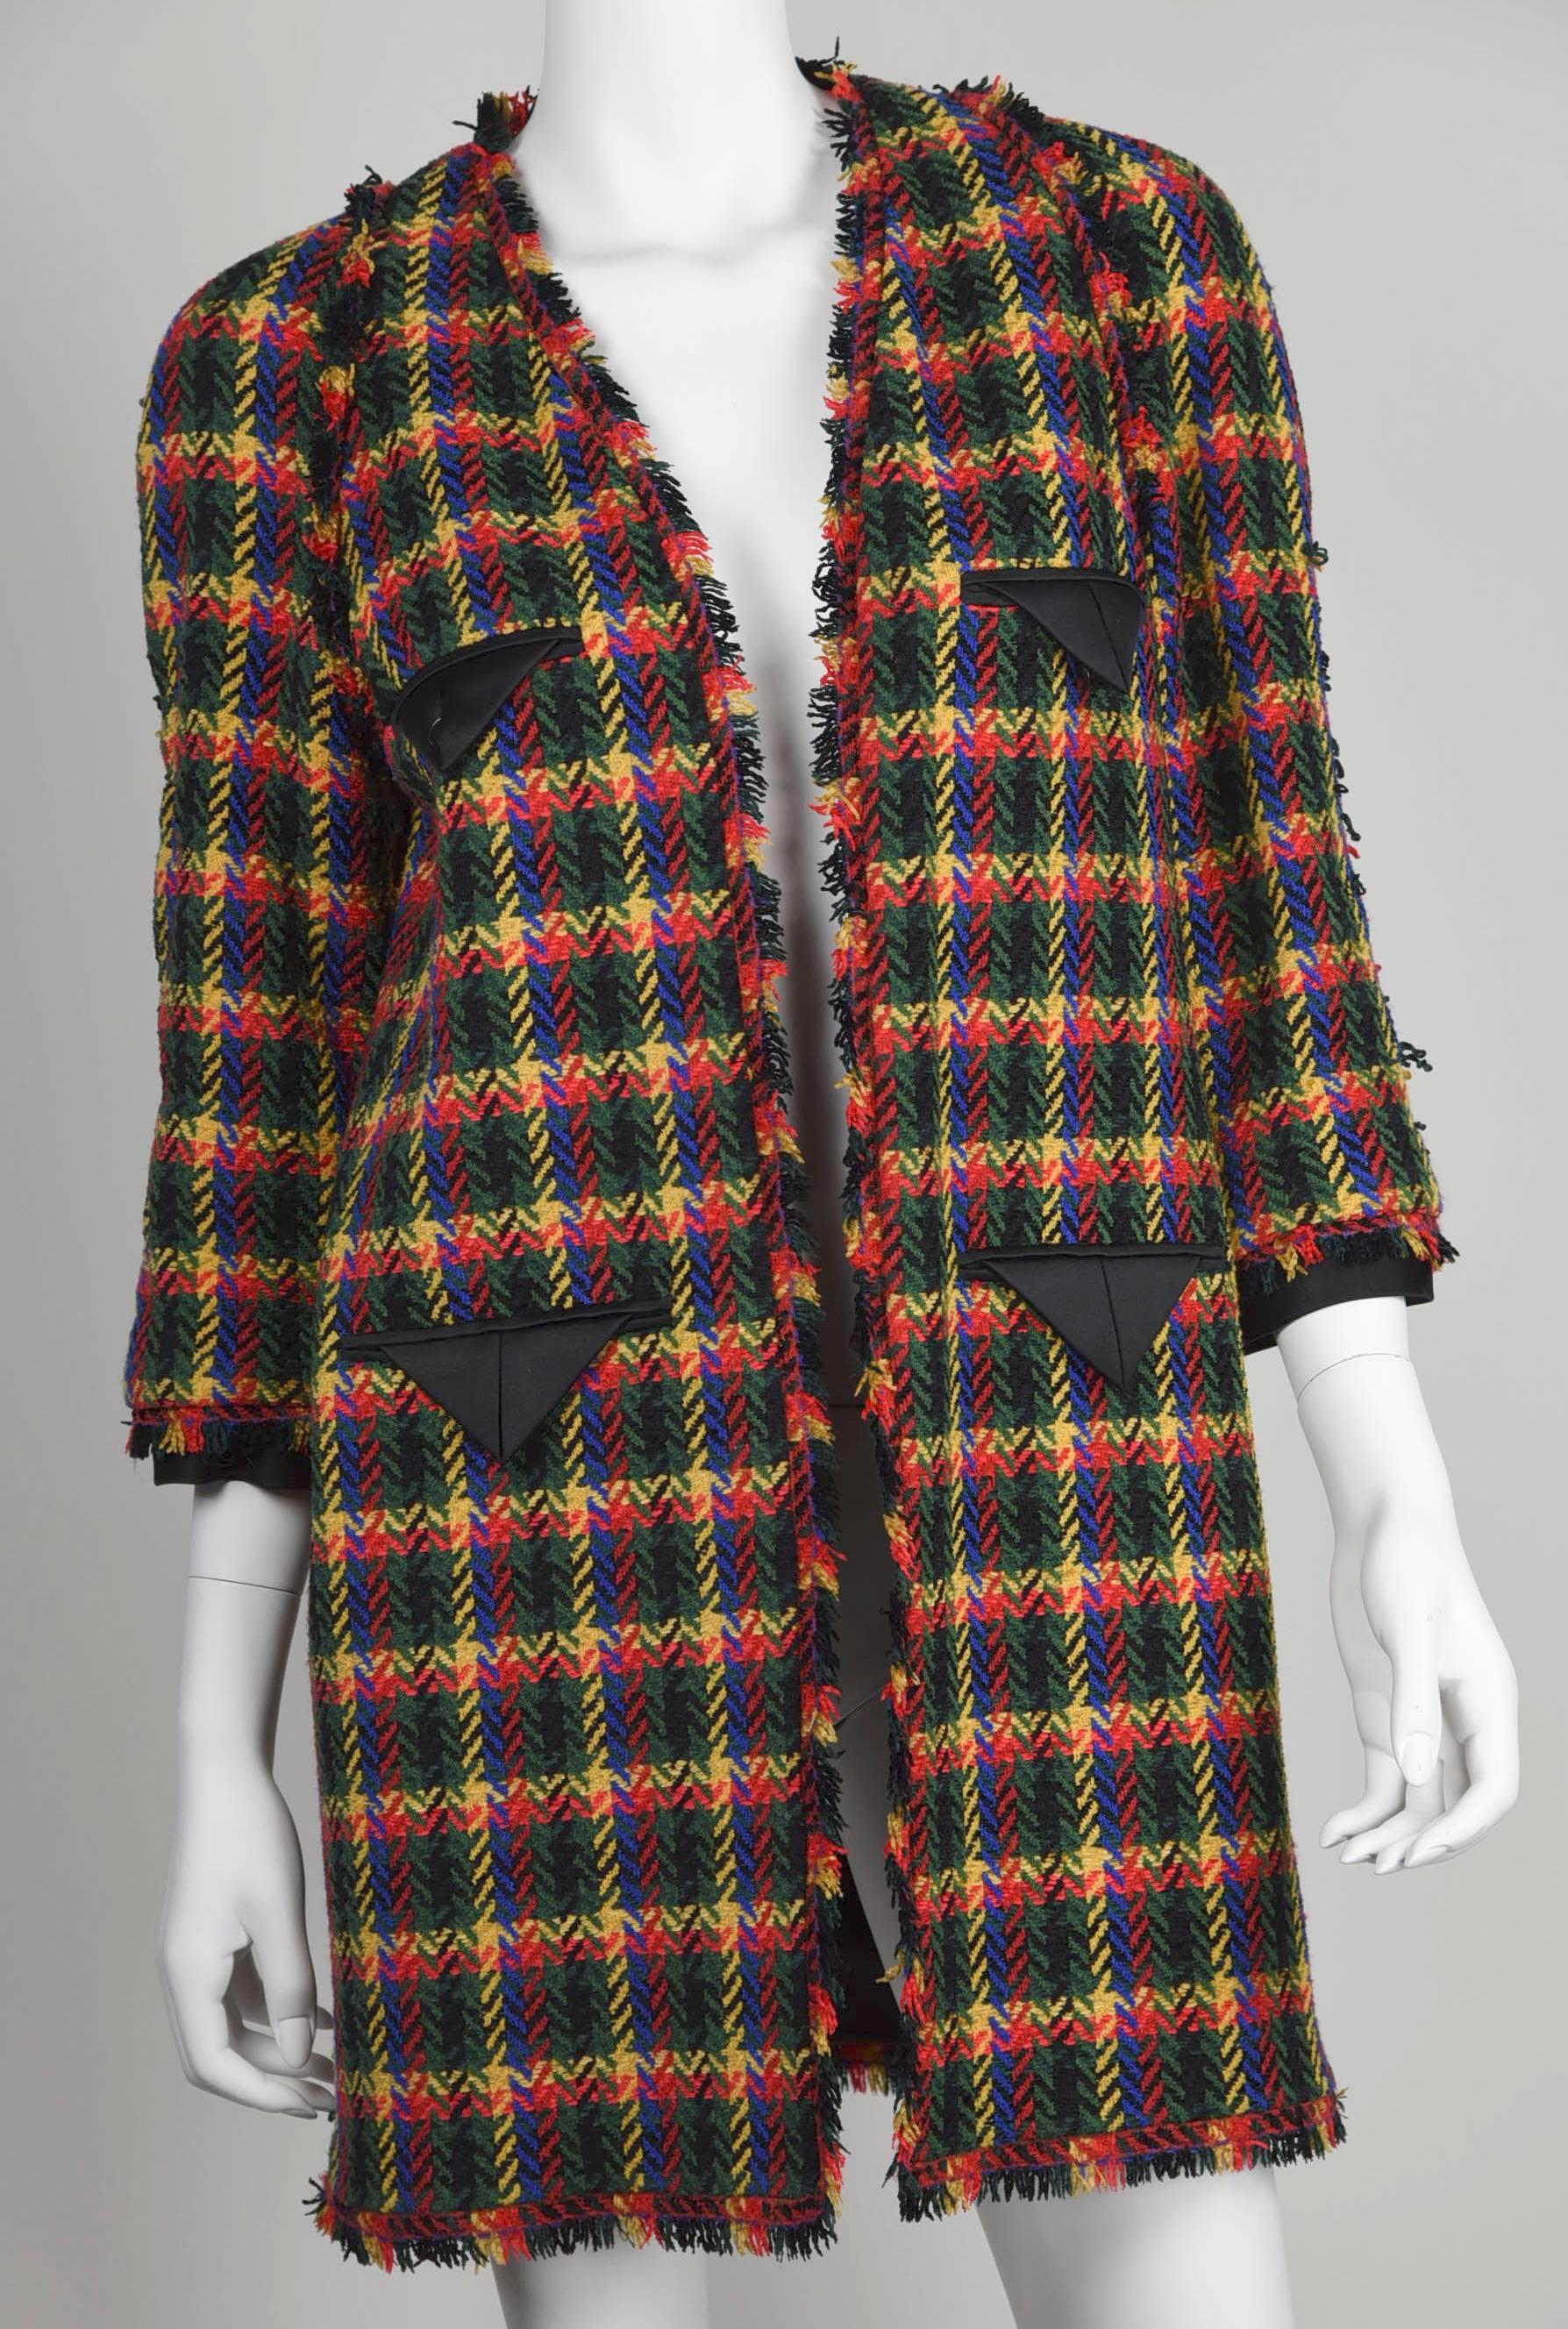 A bright yellow, green, red and black plaid three-quarter coat to perk up black Chanel dresses, skirts and pants.  Fabric is 47% acrylic, 42 % wool and 11% nylon and lining/trim is 100% silk black satin.  Measurements are:  Height 33". Bust